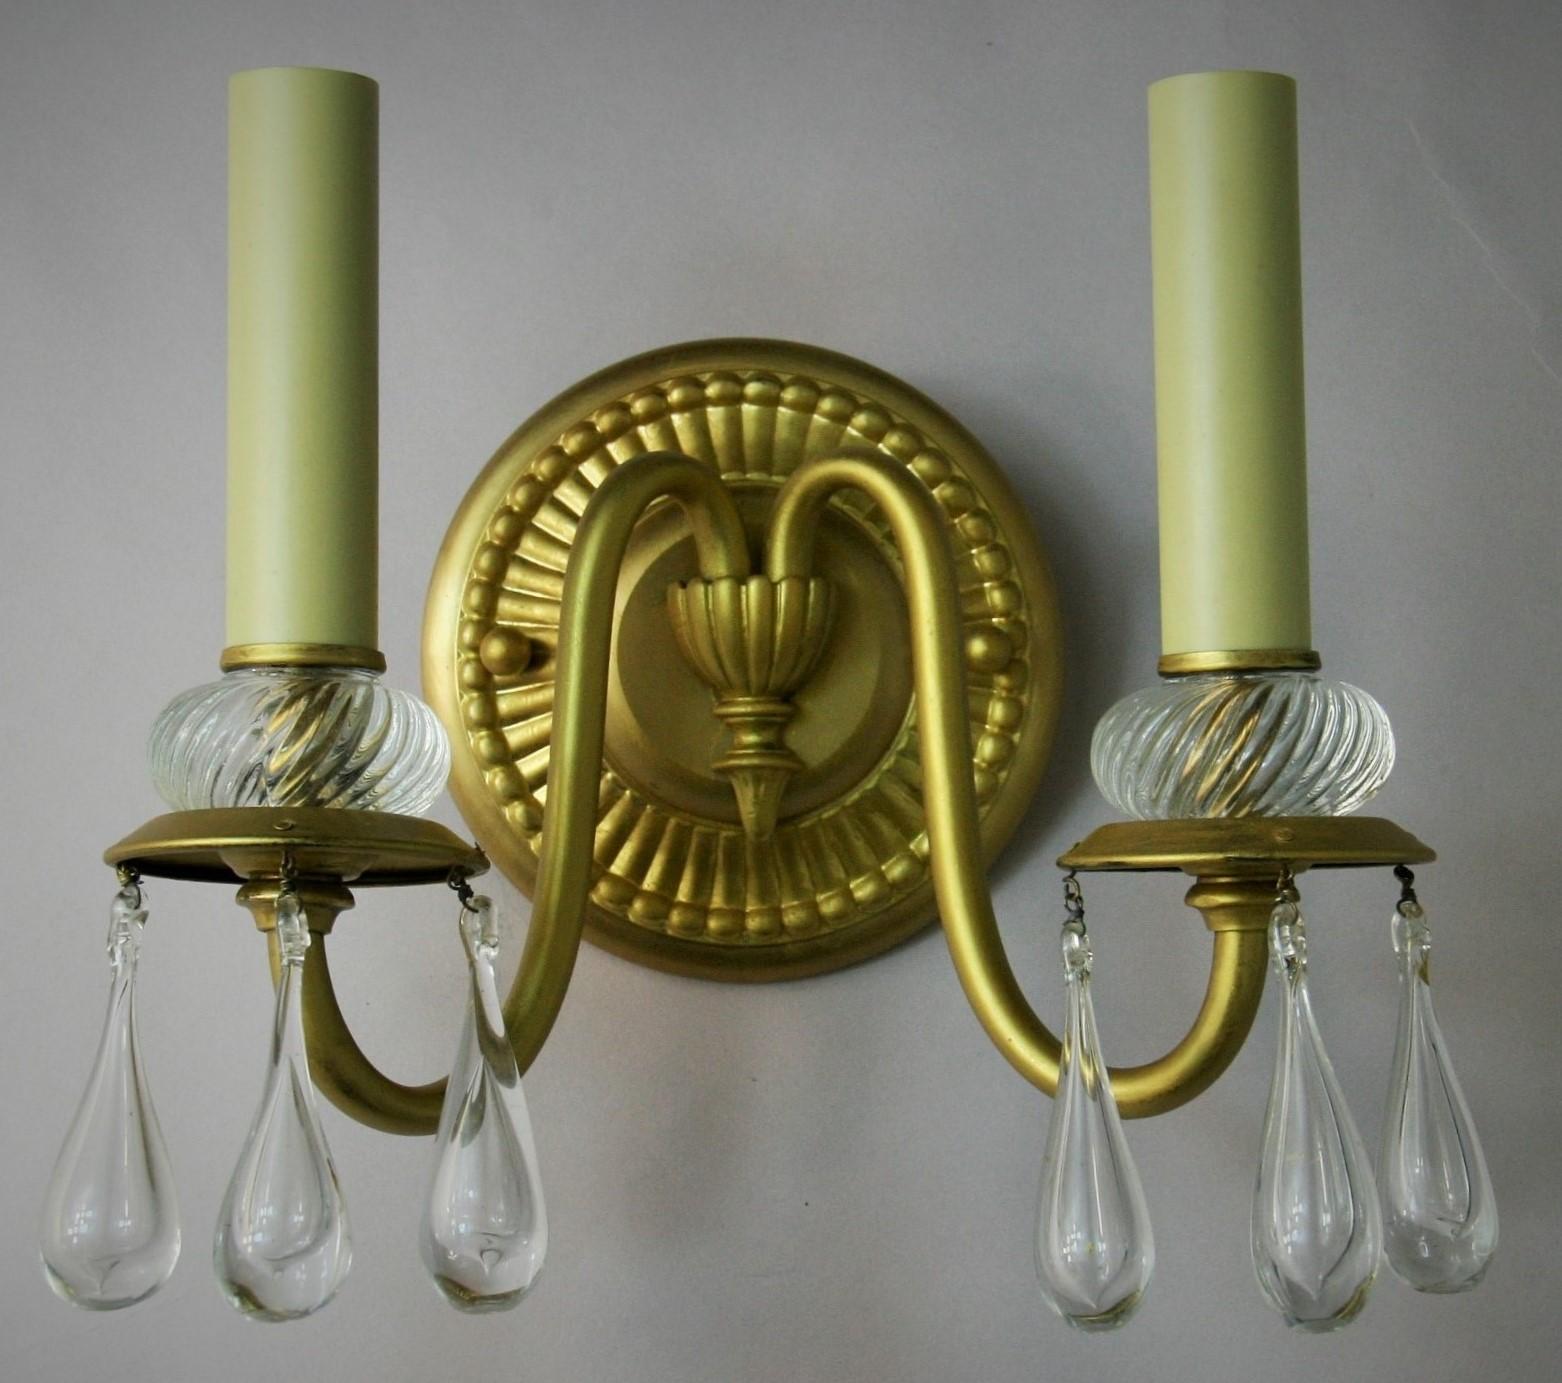 1590 Italian 2 light brass sconces with Murano hand made tear drop crystal
Rewired
takes 2 60 watt candelabra based bulbs
Priced per pair 